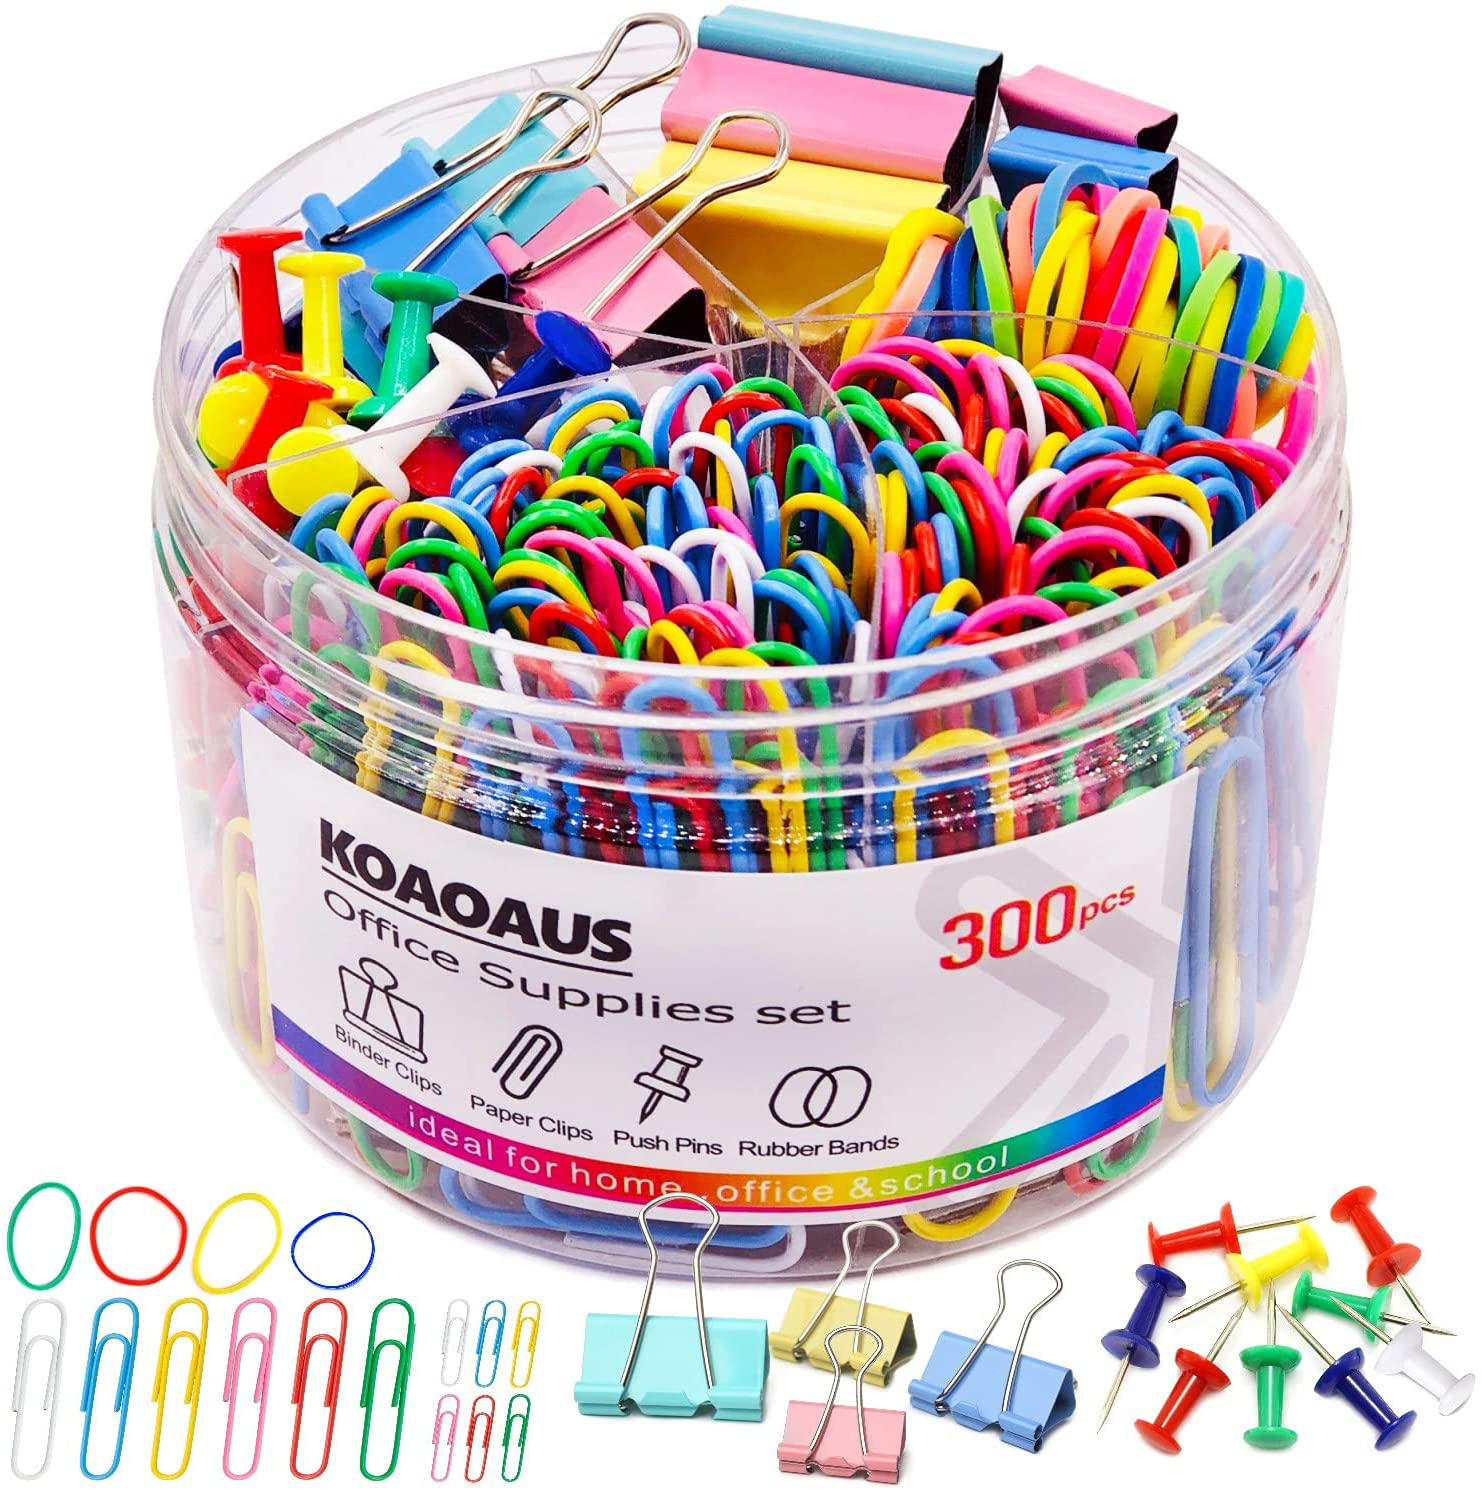 300 Pcs Binder Clips Paper Clips Push Pins, Medium Mini Binder Clips Combination, Jumbo and Small Paper Clips, Tacks, Rubber Bands，Office Supplies School Supplies, KOAOAUS Multi-Color Color Set.